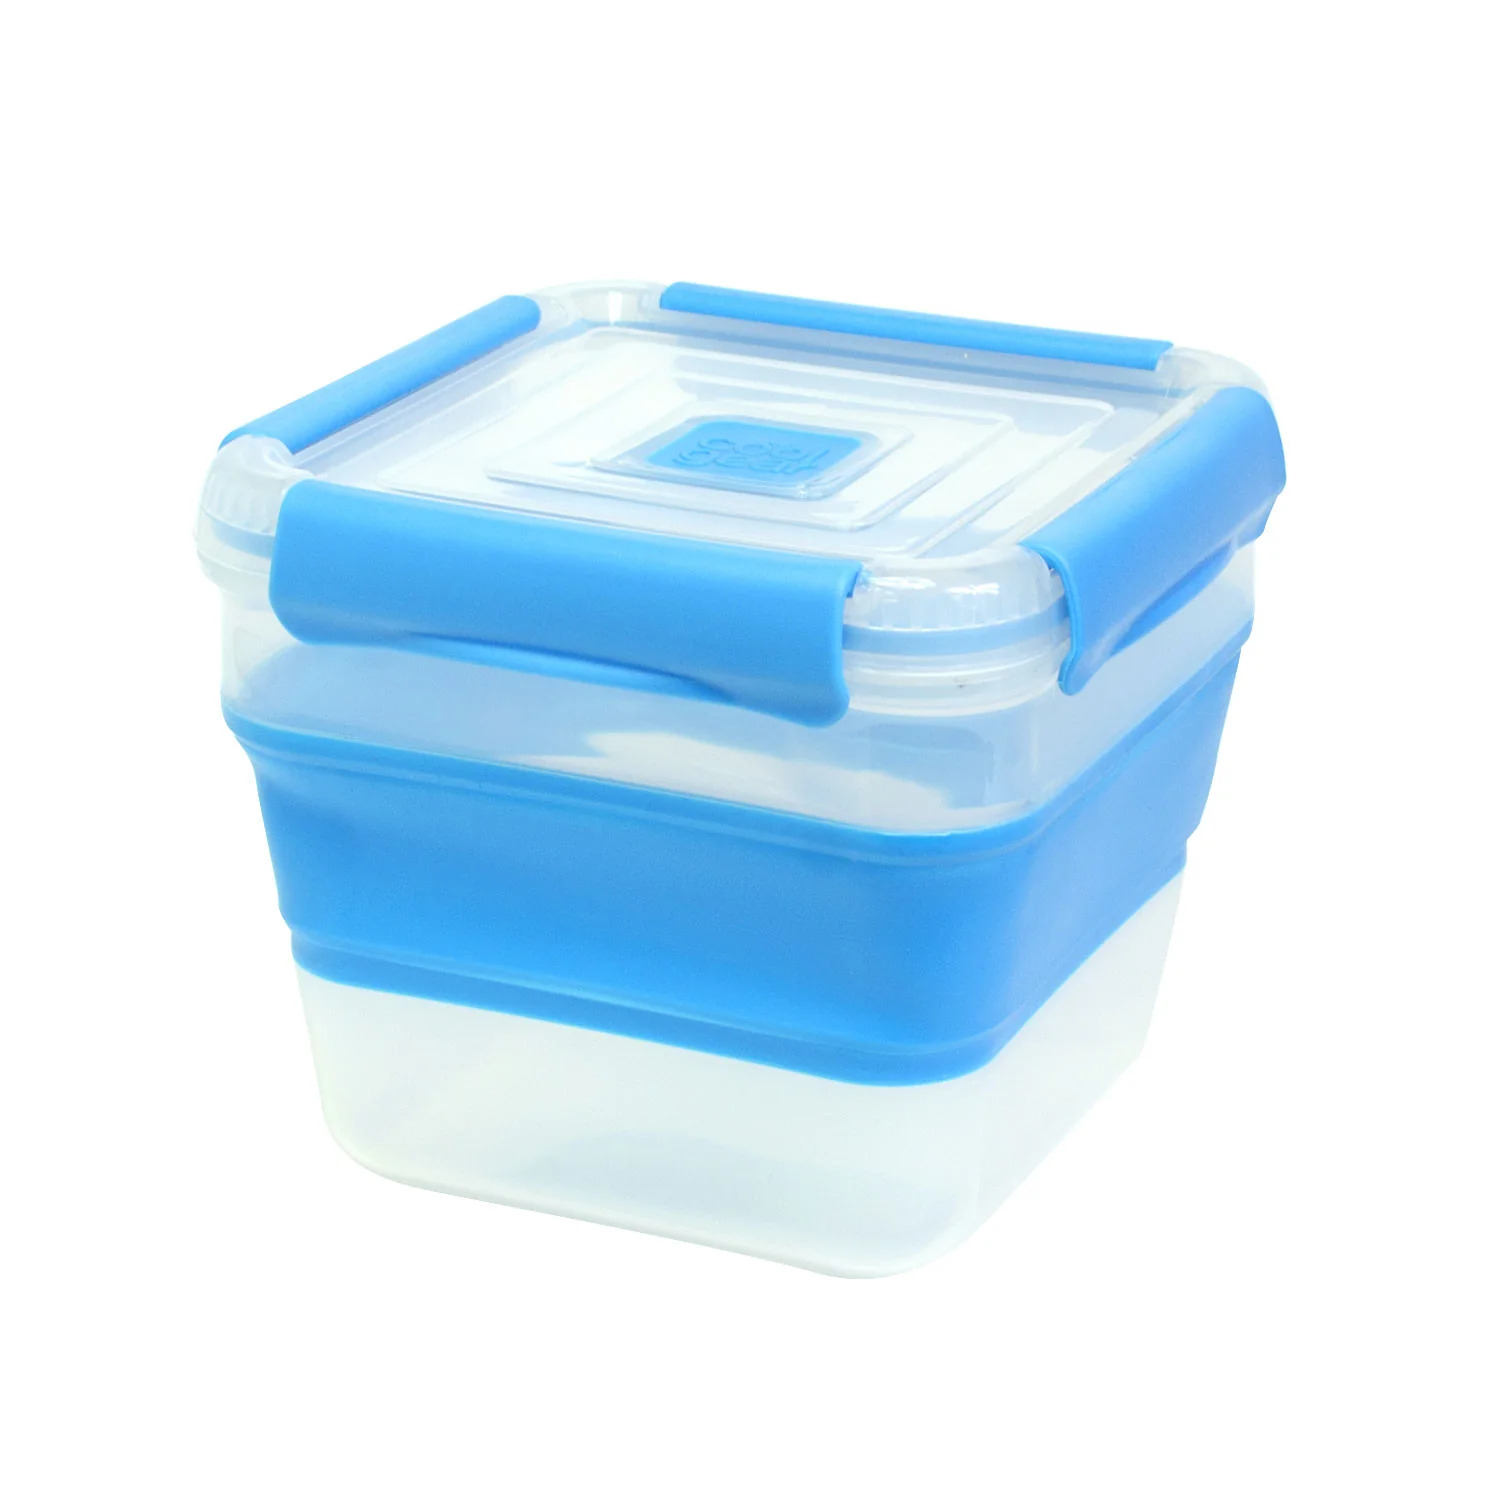 COOL GEAR 3-Pack Collapsible 7.5 Cup Square Food Container | Dishwasher and Microwave Safe | Perfect for On The Go Lunches and Leftovers | Expands to Hold 2x More | Air Tight Snaps Keeps Food Fresh - image 3 of 5